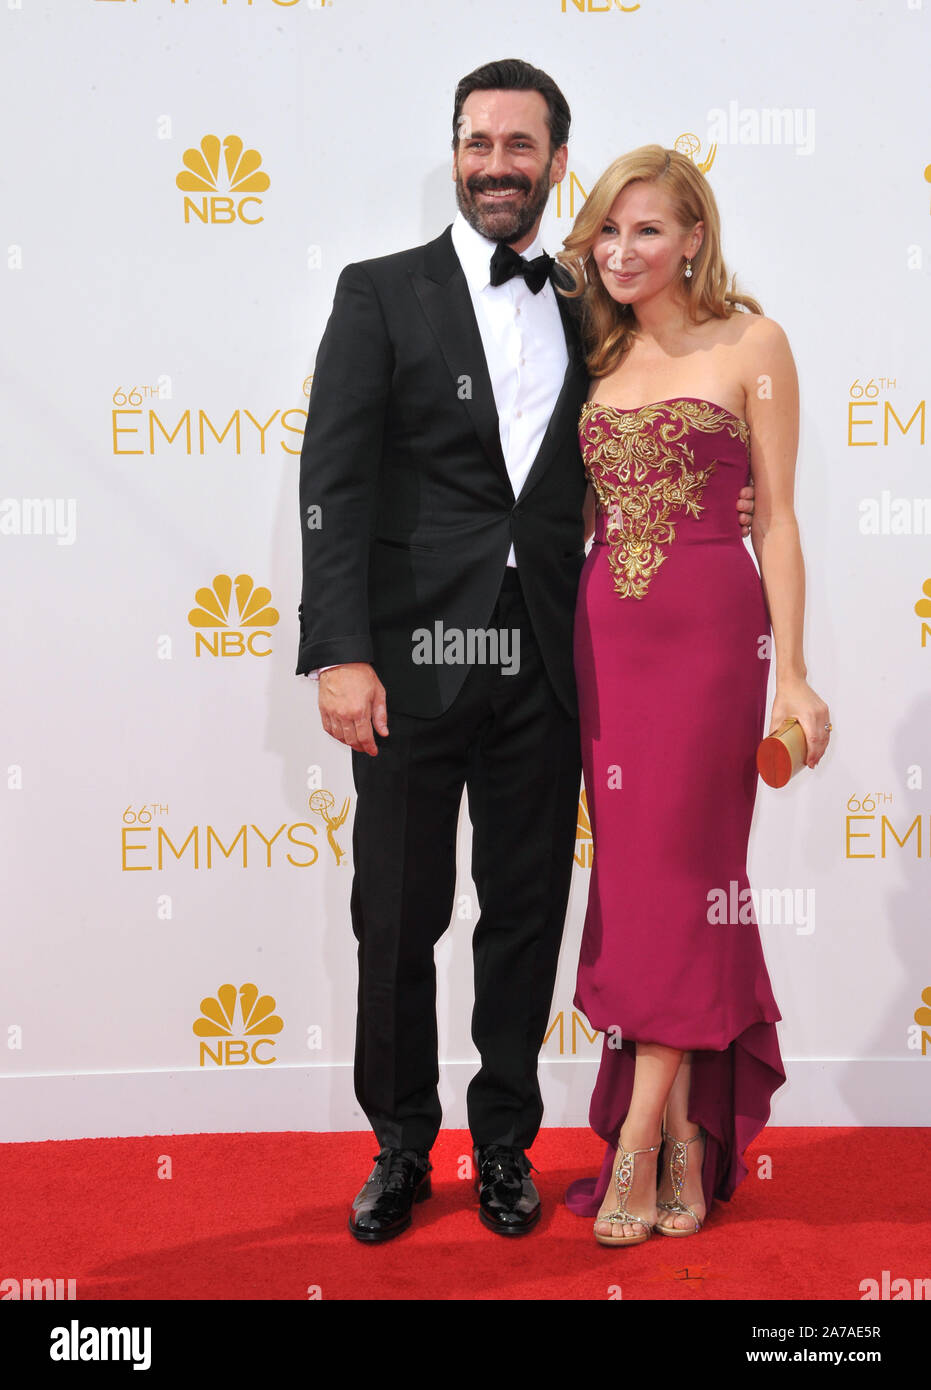 LOS ANGELES, CA - AUGUST 25, 2014: Jon Hamm & Jennifer Westfeldt at the 66th Primetime Emmy Awards at the Nokia Theatre L.A. Live downtown Los Angeles.© 2014 Paul Smith / Featureflash Stock Photo